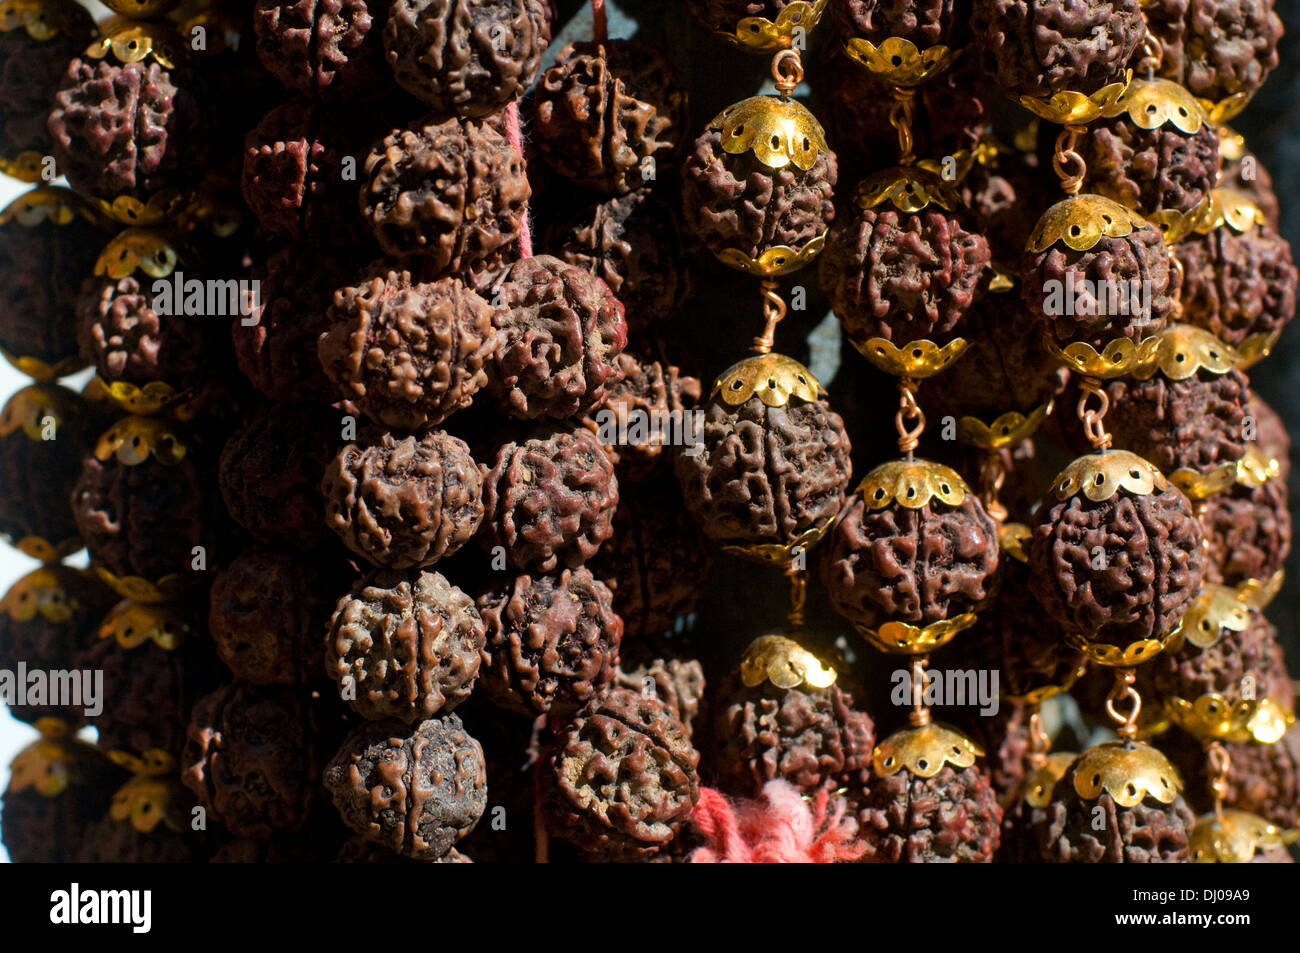 Strings of Rudraksha beads hanging on bronze strands for sale in Southern Indian village Stock Photo